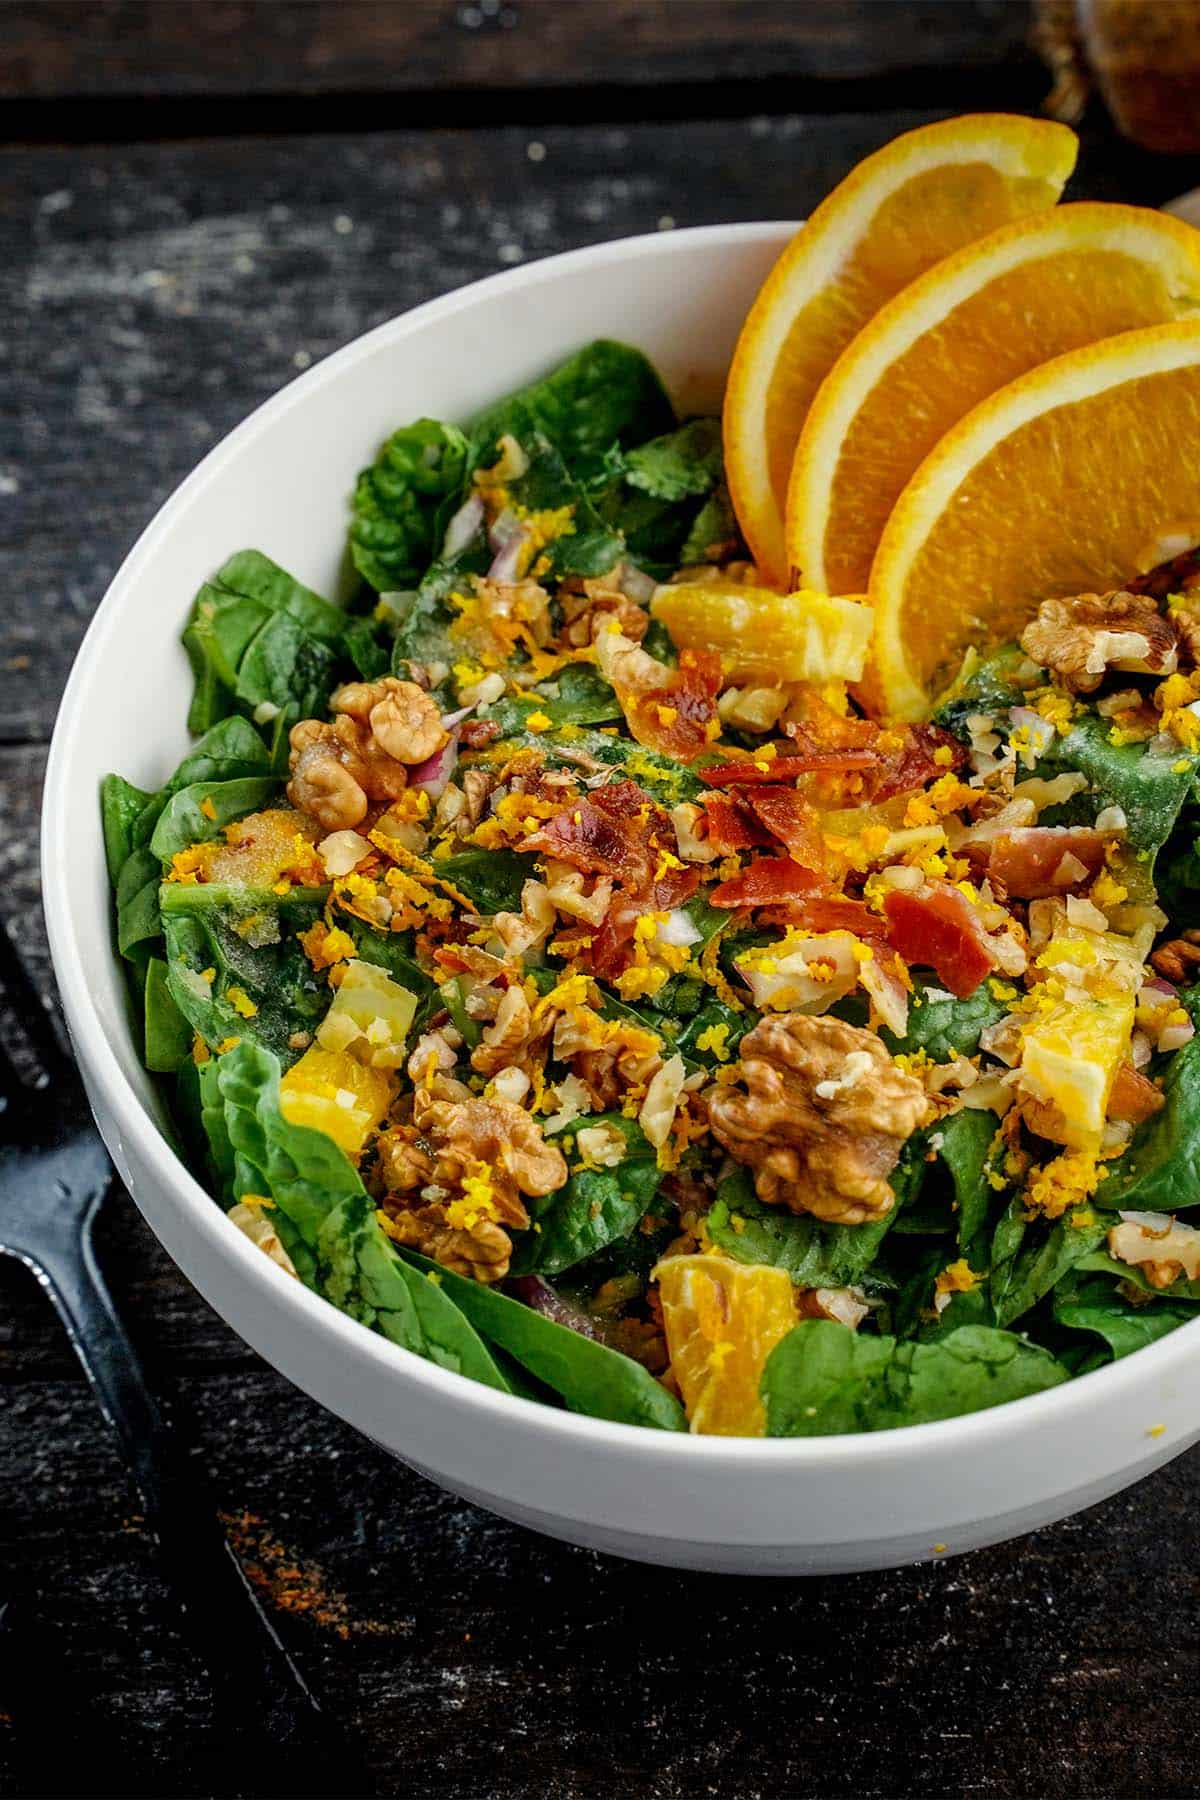 Wilted Spinach greens salad